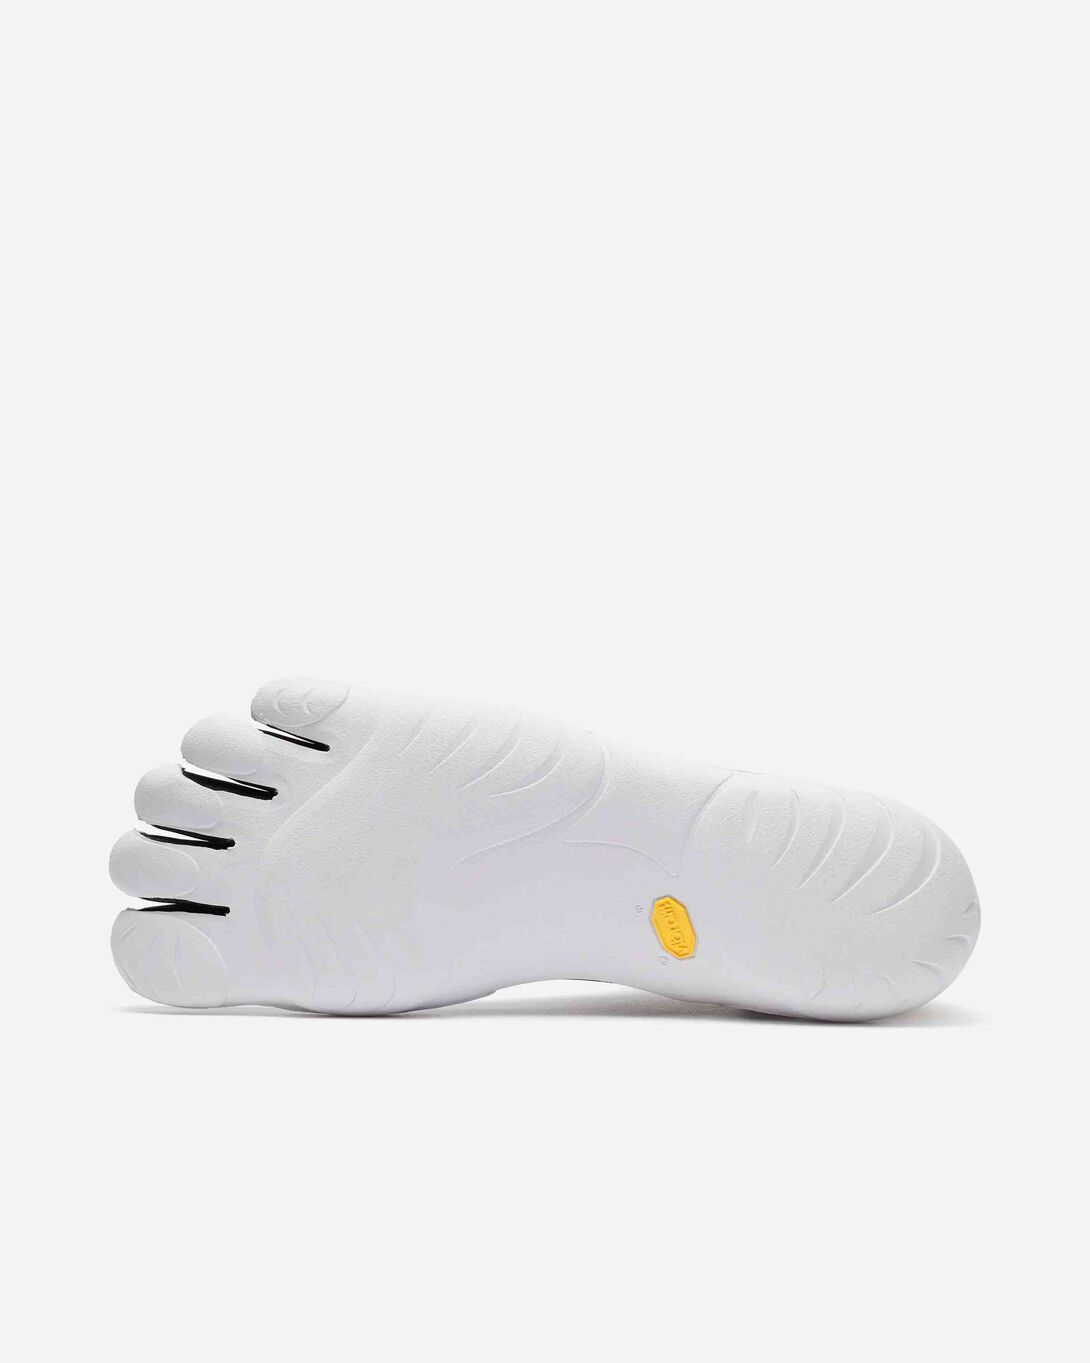 Vibram Fivefingers KSO XS Five Fingers Shoes Walking Hiking Trekking  Outdoor Wet Traction Sneakers Urban Playground Climb